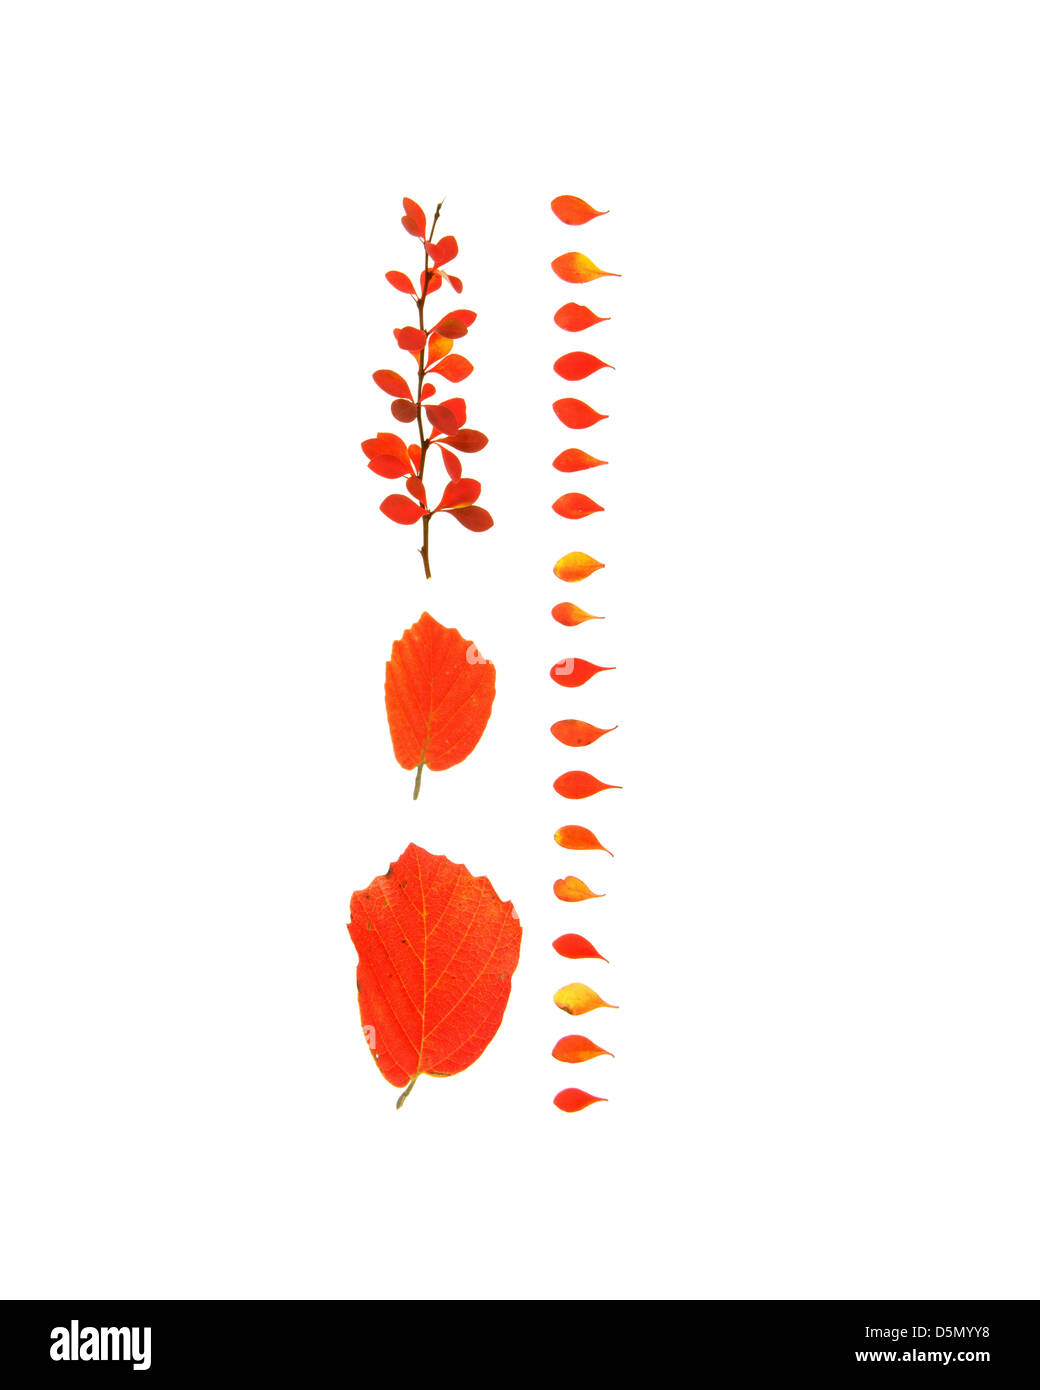 A pattern formed of bright red barberry and fothergilla leaves on a white background (autumn foliage, Bar Harbor, Maine) Stock Photo